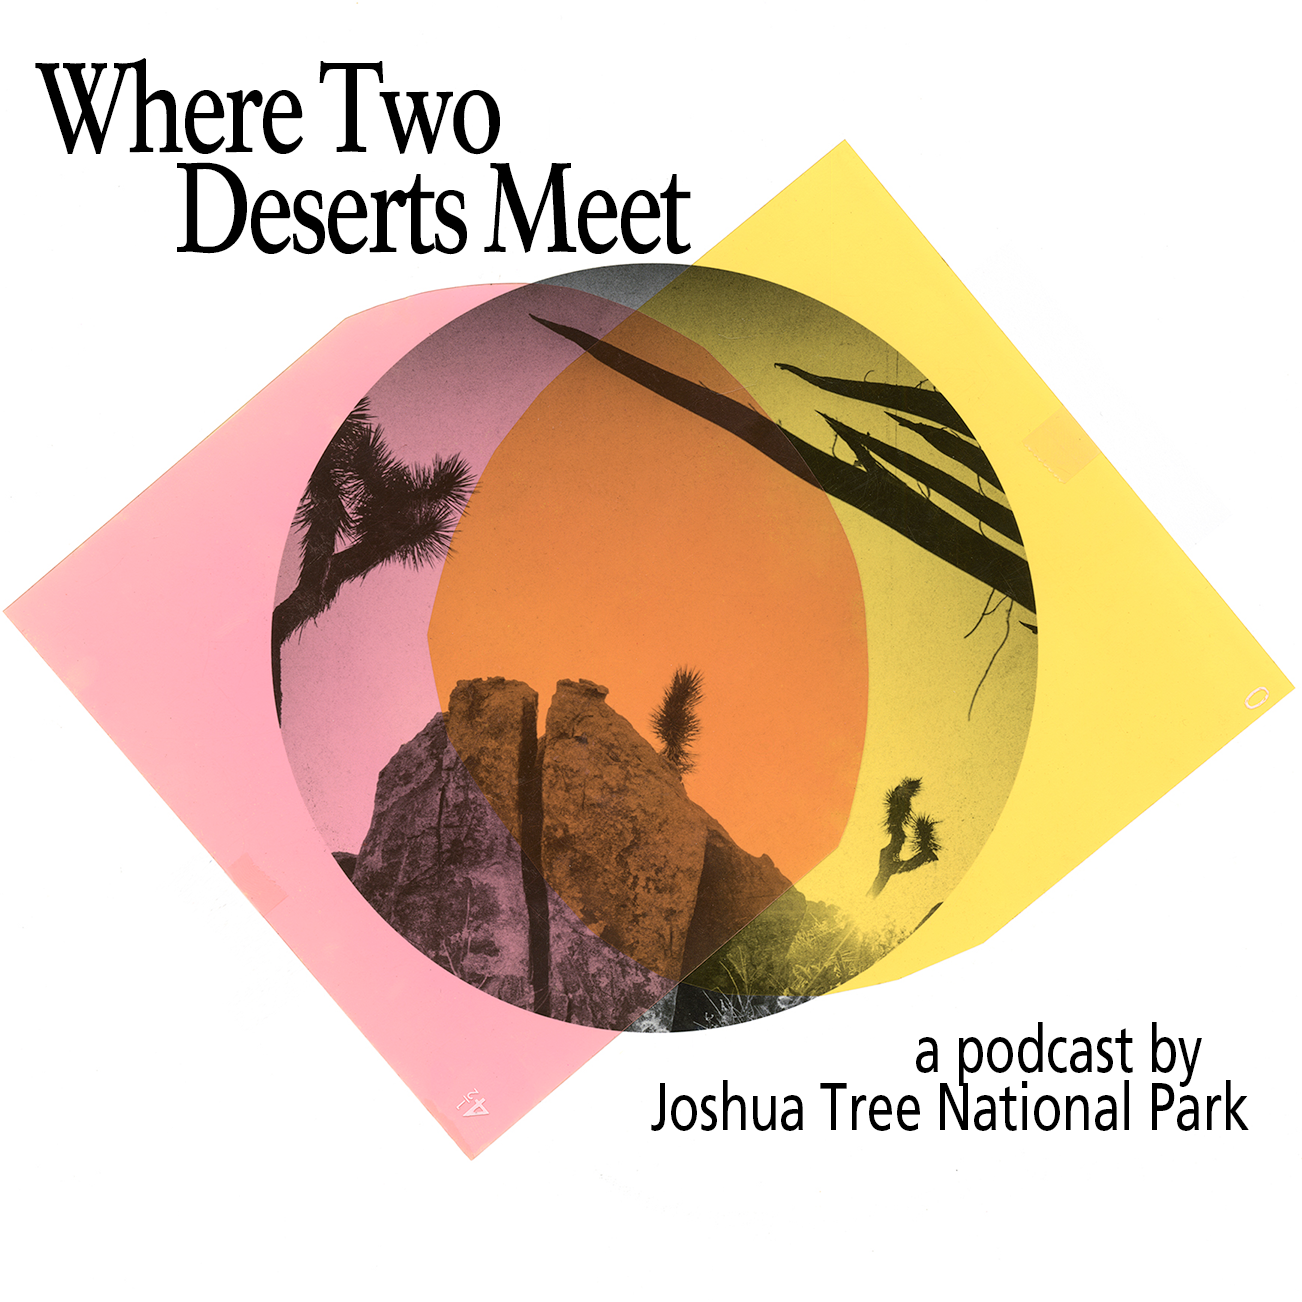 Words on the logo say, Where Two Deserts Meet a podcast by Joshua Tree National Park with an image of a rock formation and johua tree